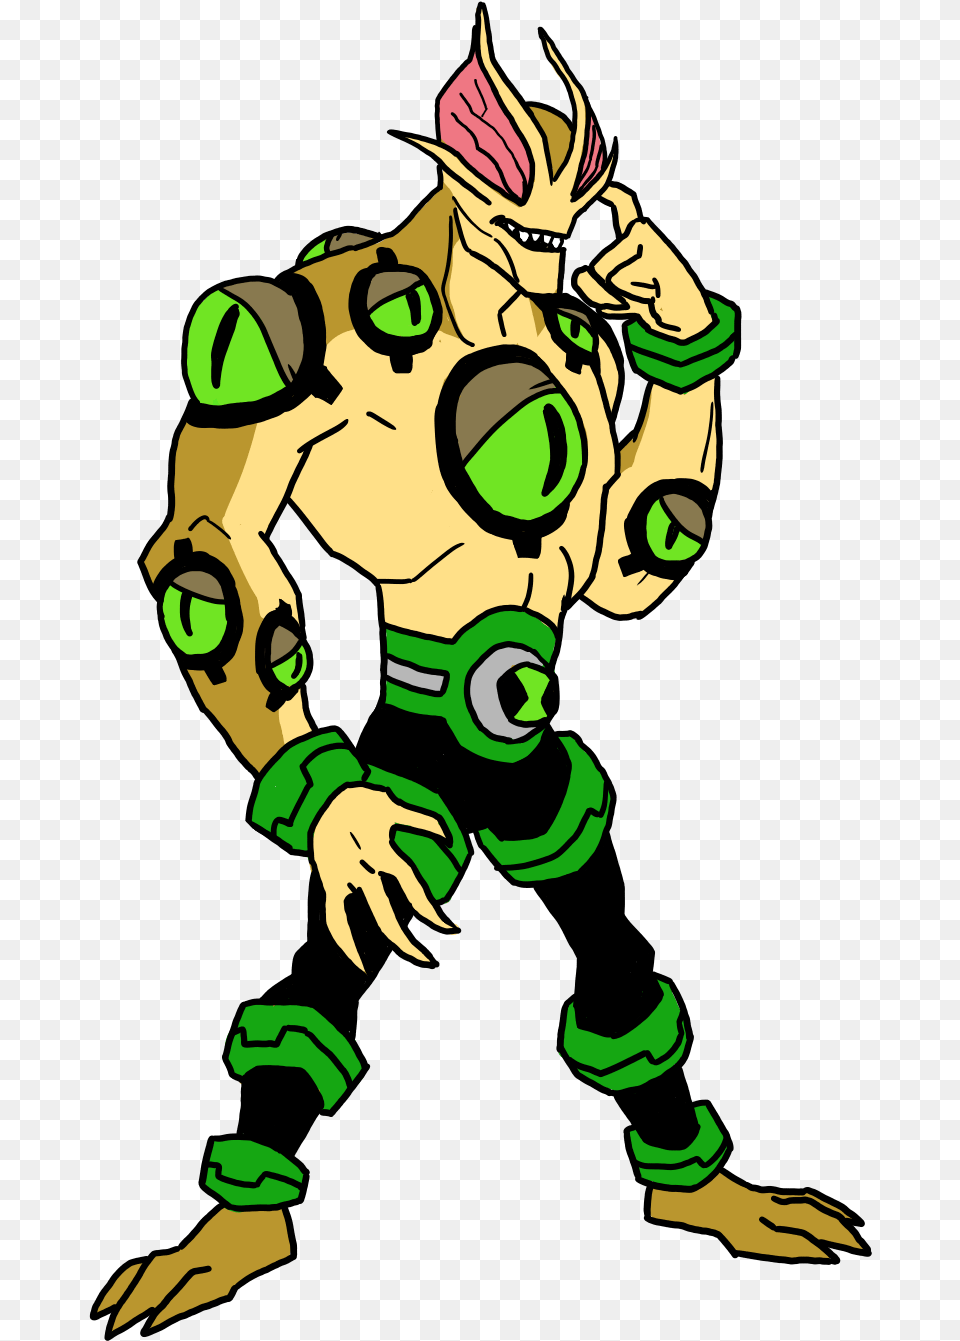 Oh Such Whimsy Eye Guy Was In The Latest Episode Ben 10 Eyeguy, Green, Adult, Male, Man Free Transparent Png